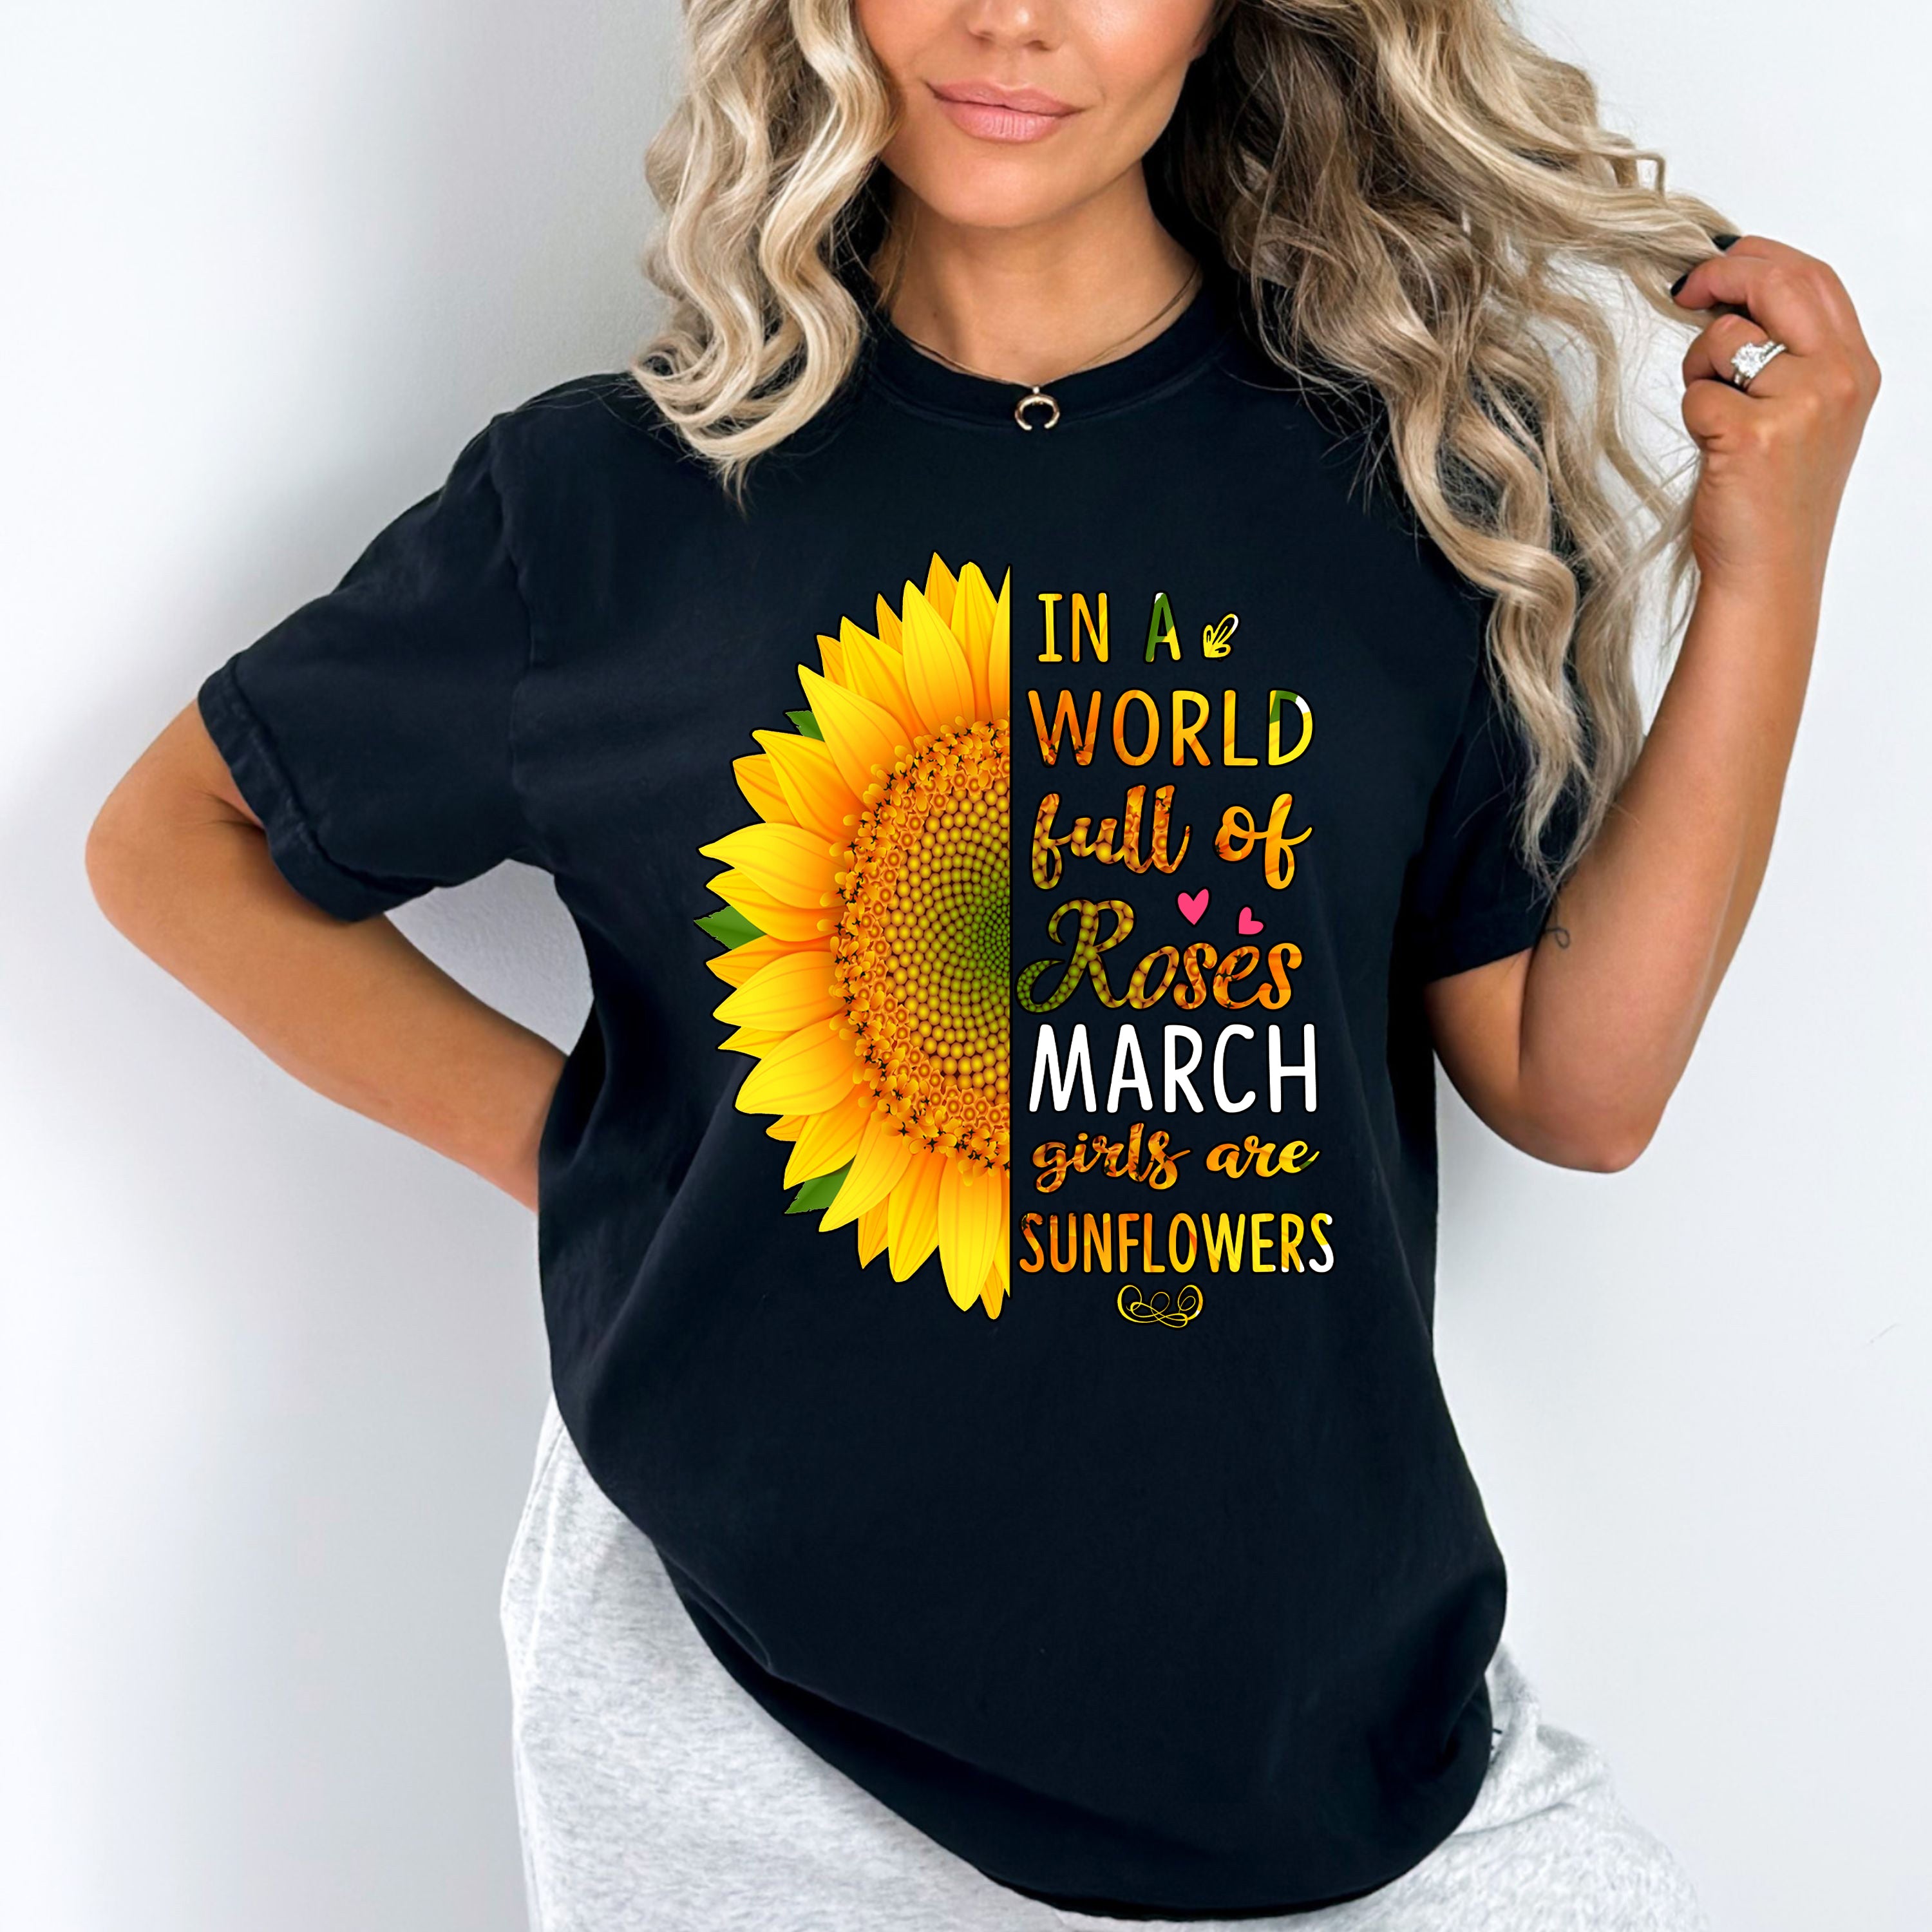 "In A World Full Of Roses March Girls are Sunflowers"